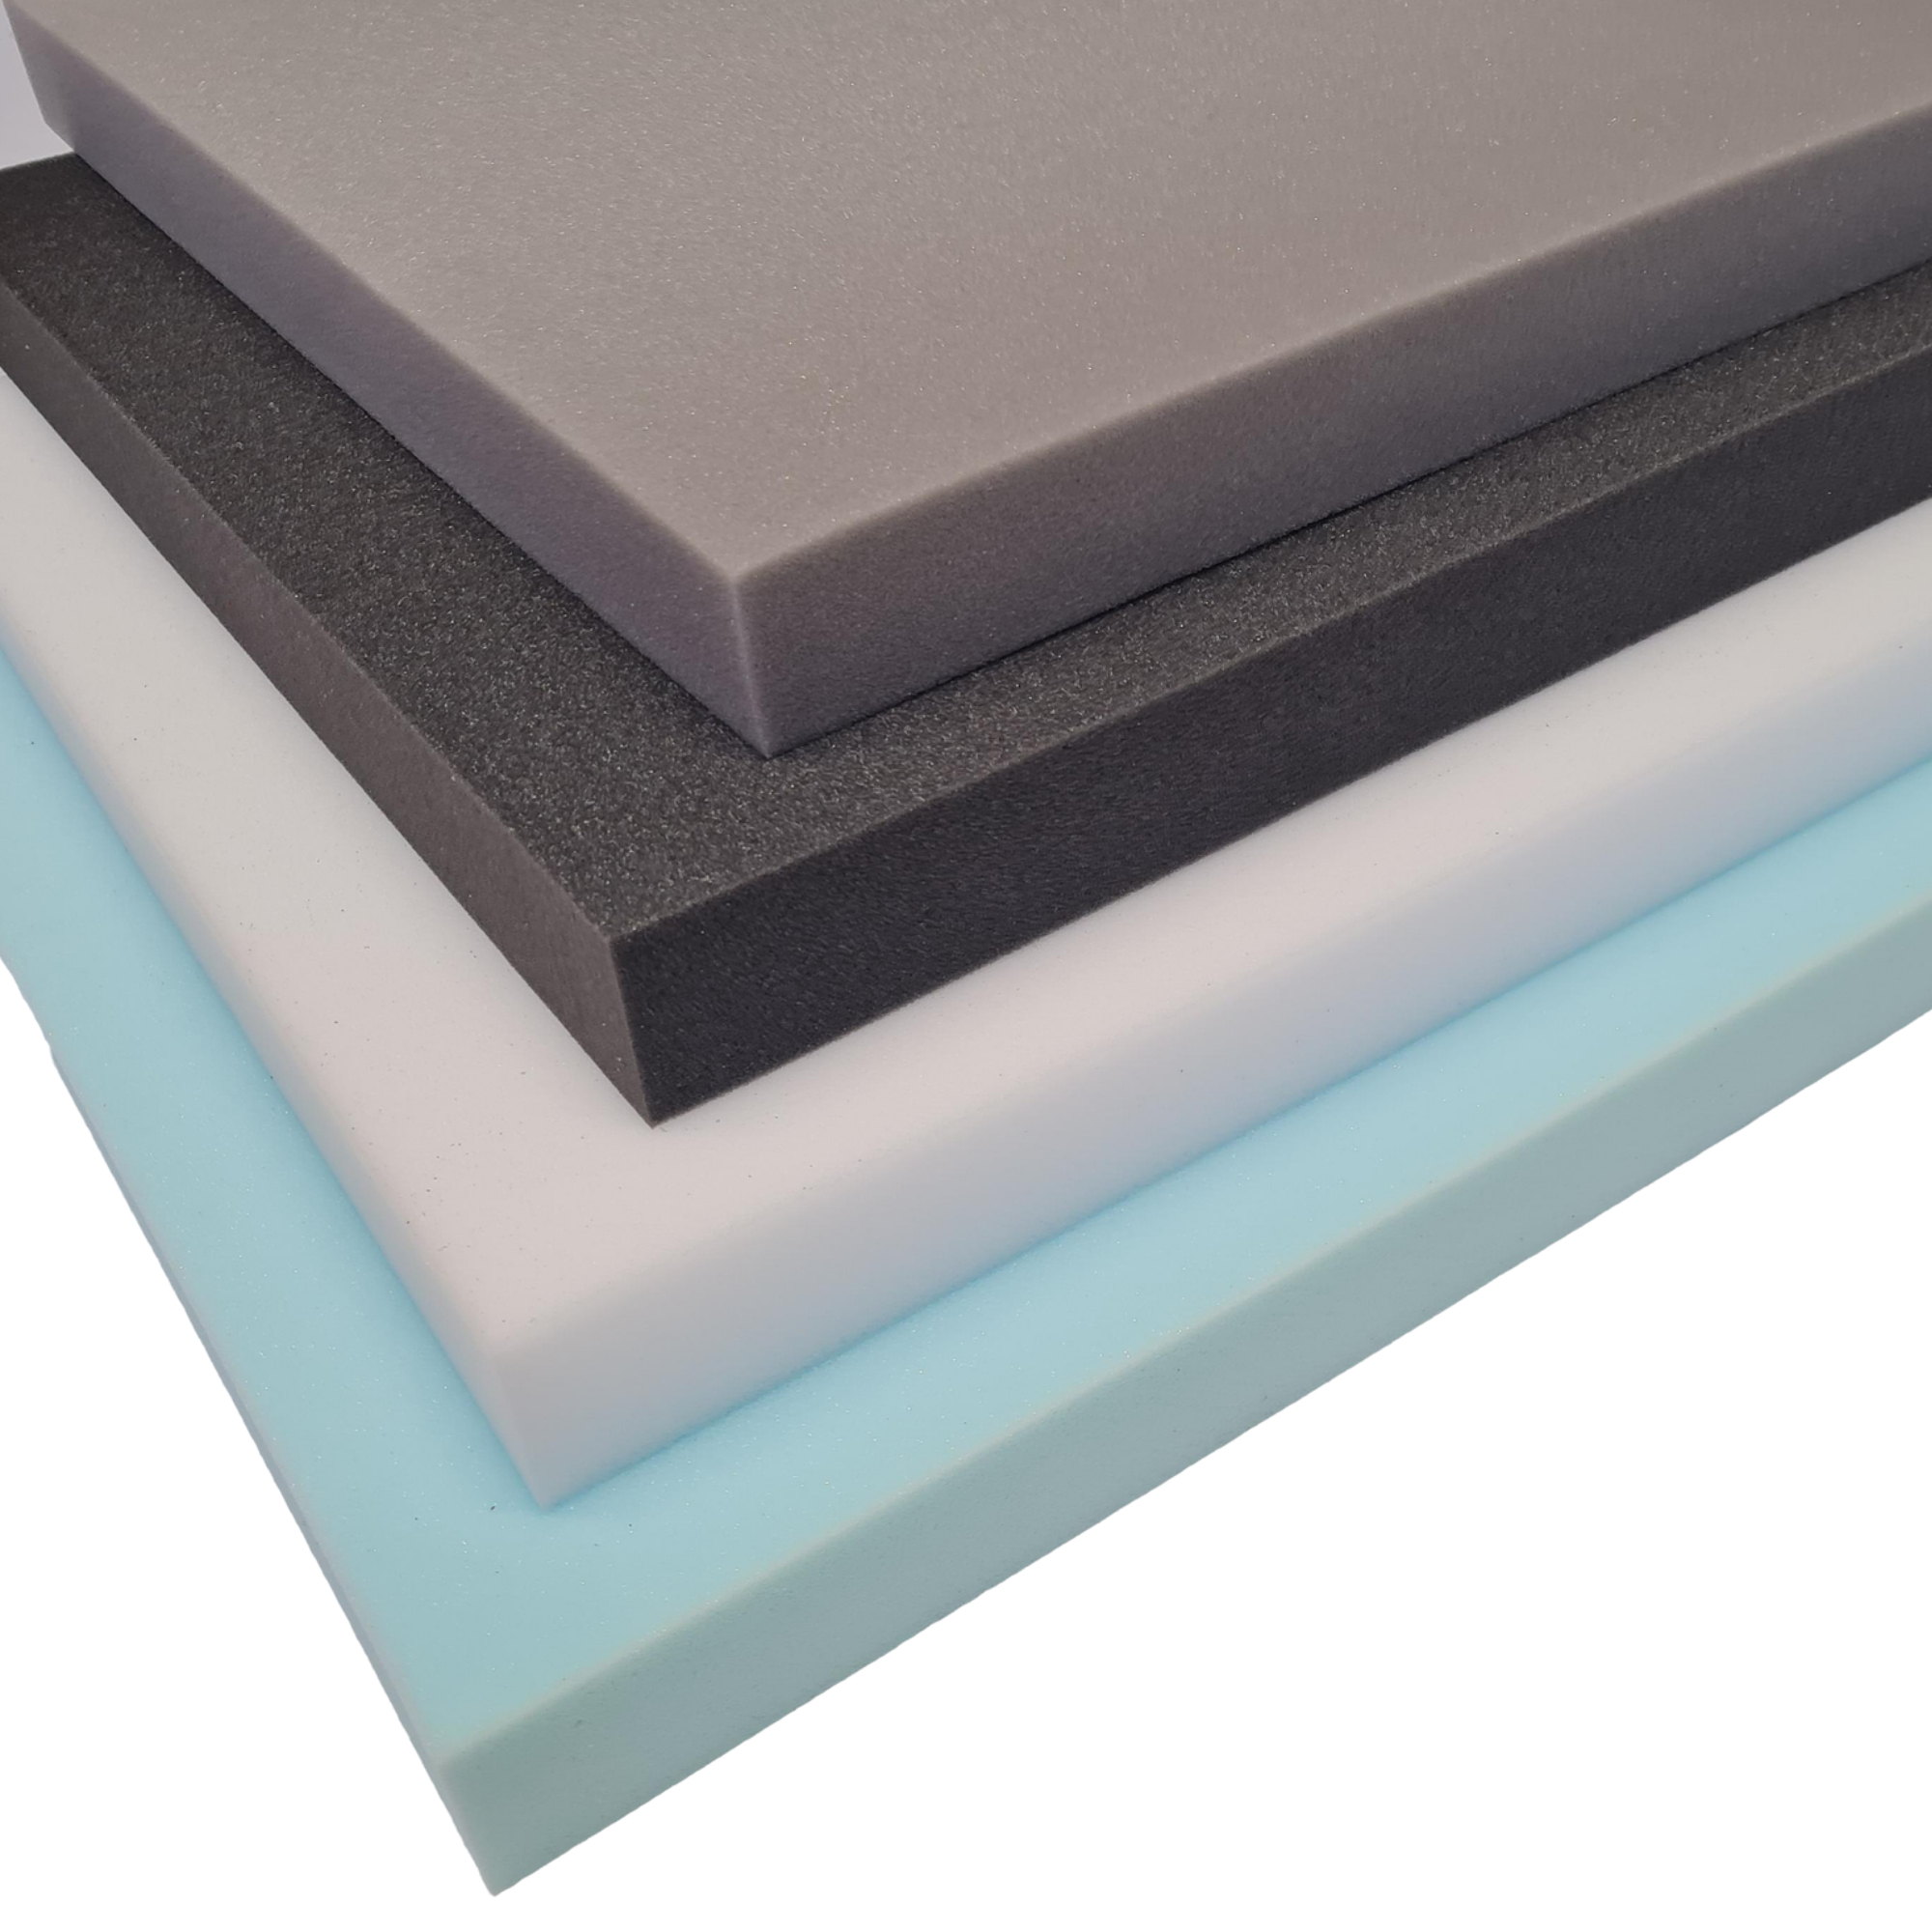 High / Medium / Re-bonded Recon Density Foam Sheet Cut at Either 70 or 60  inches x 20 inches x various depths – Reliant Sales Foam